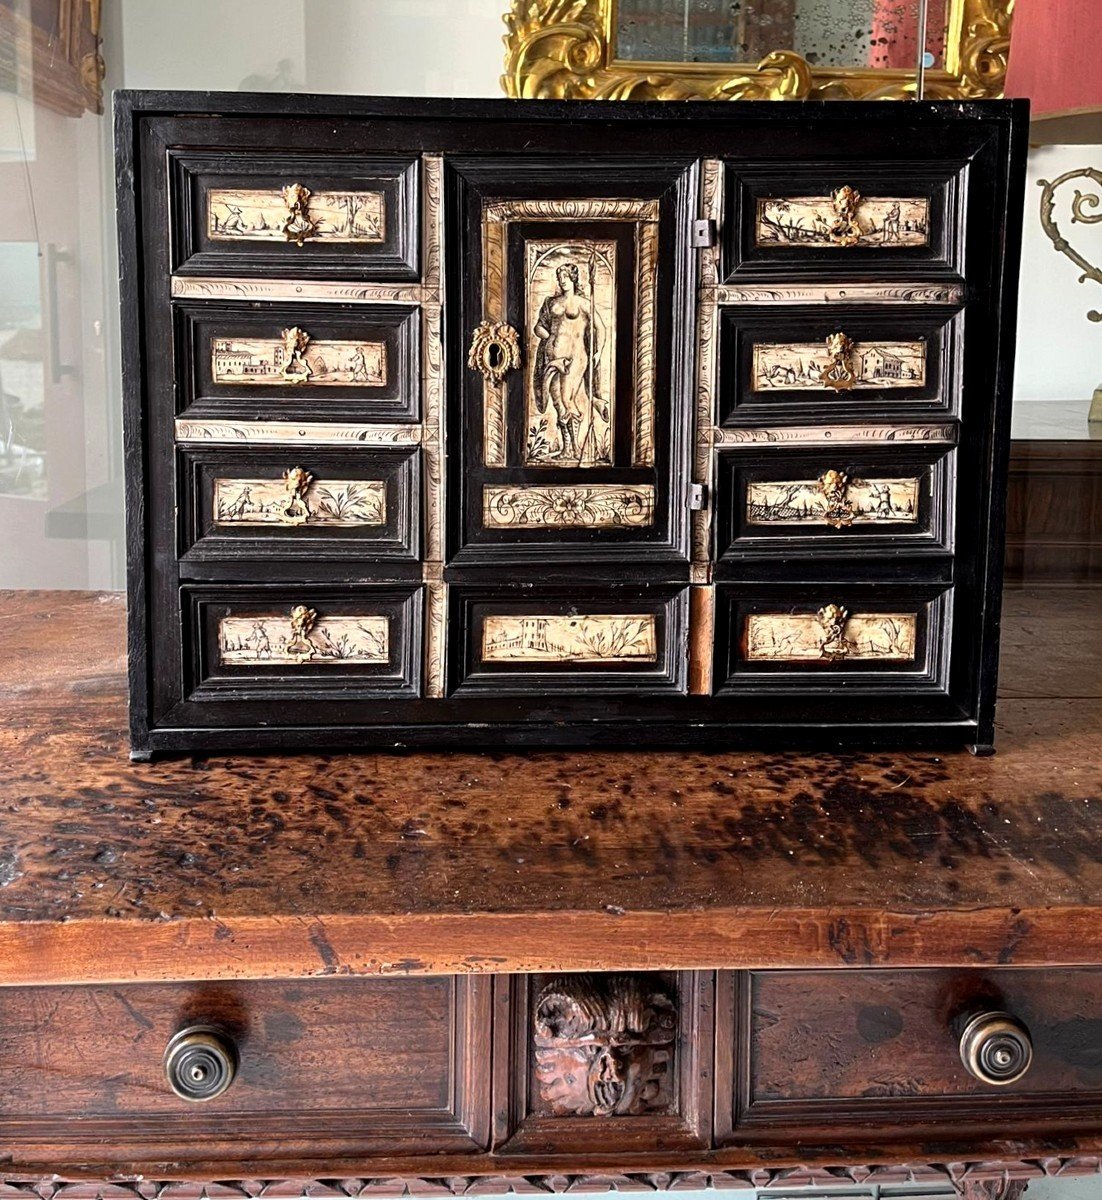 Antique Tuscan Coin Cabinet From The First Half Of The 17th Century With Fine Engravings-photo-4